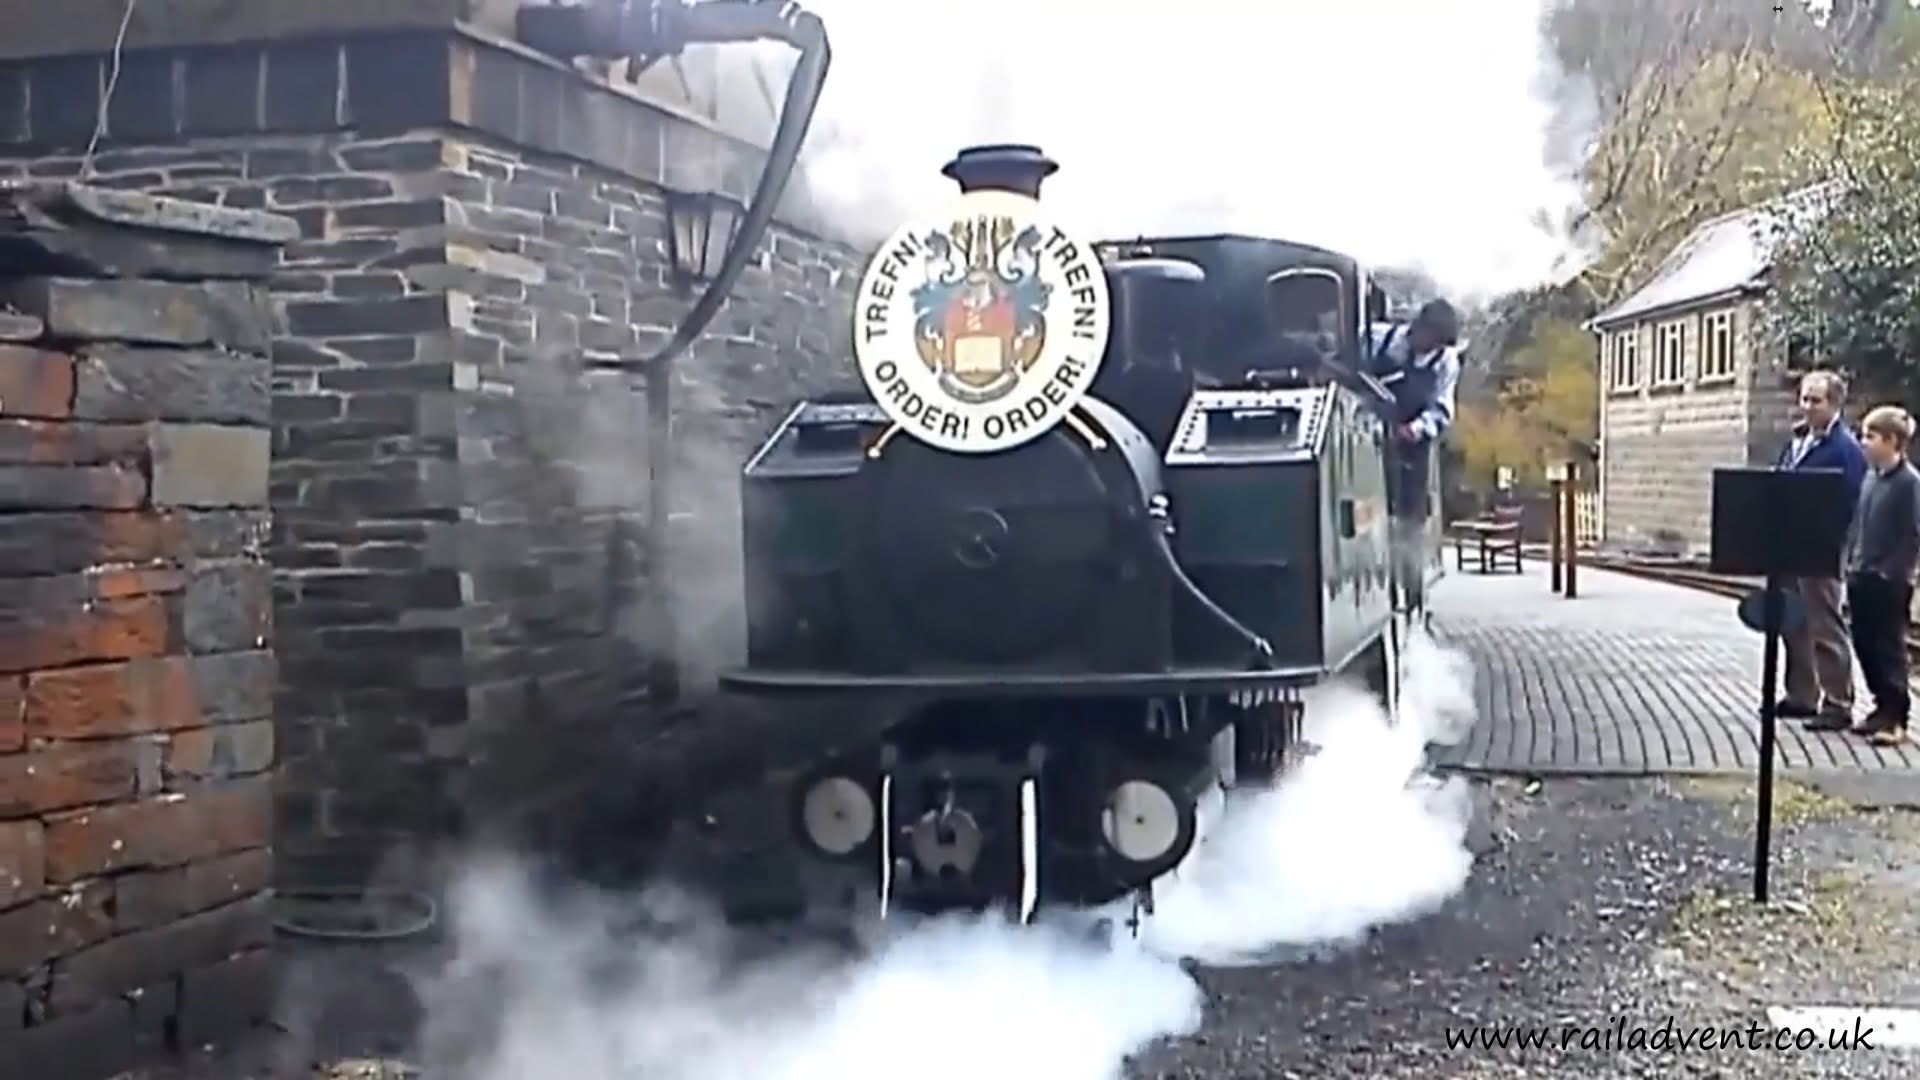 Earl of Merioneth at Tanybwlch in 2013